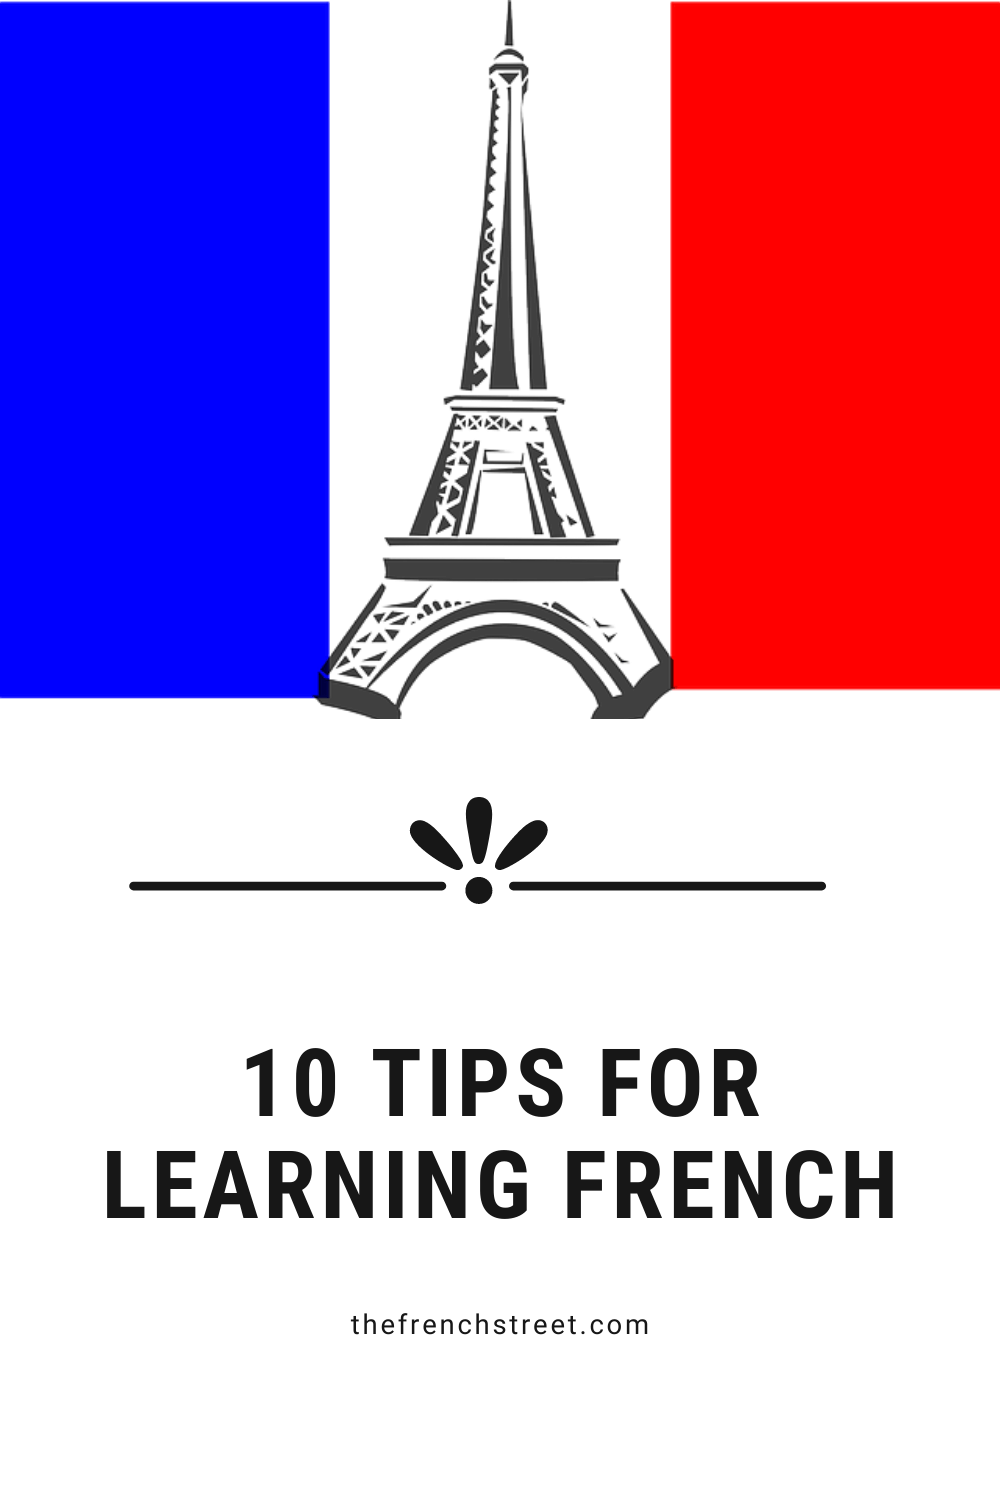 10 Tips for Learning French